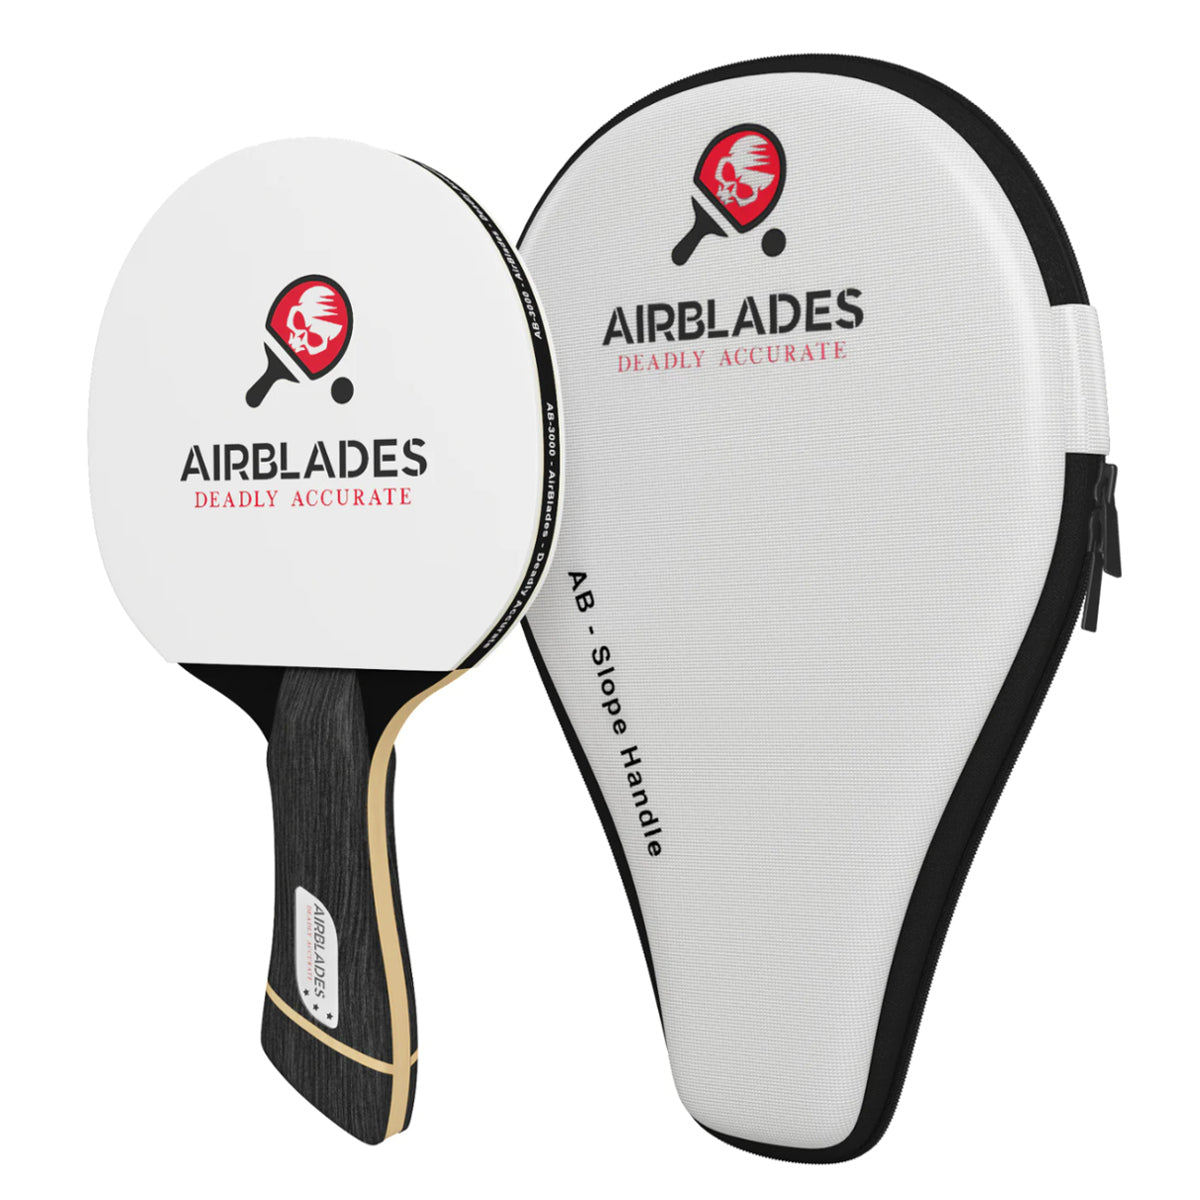 Airblades Professional Ping Pong Paddle with Hard Carry Case (3 Star)